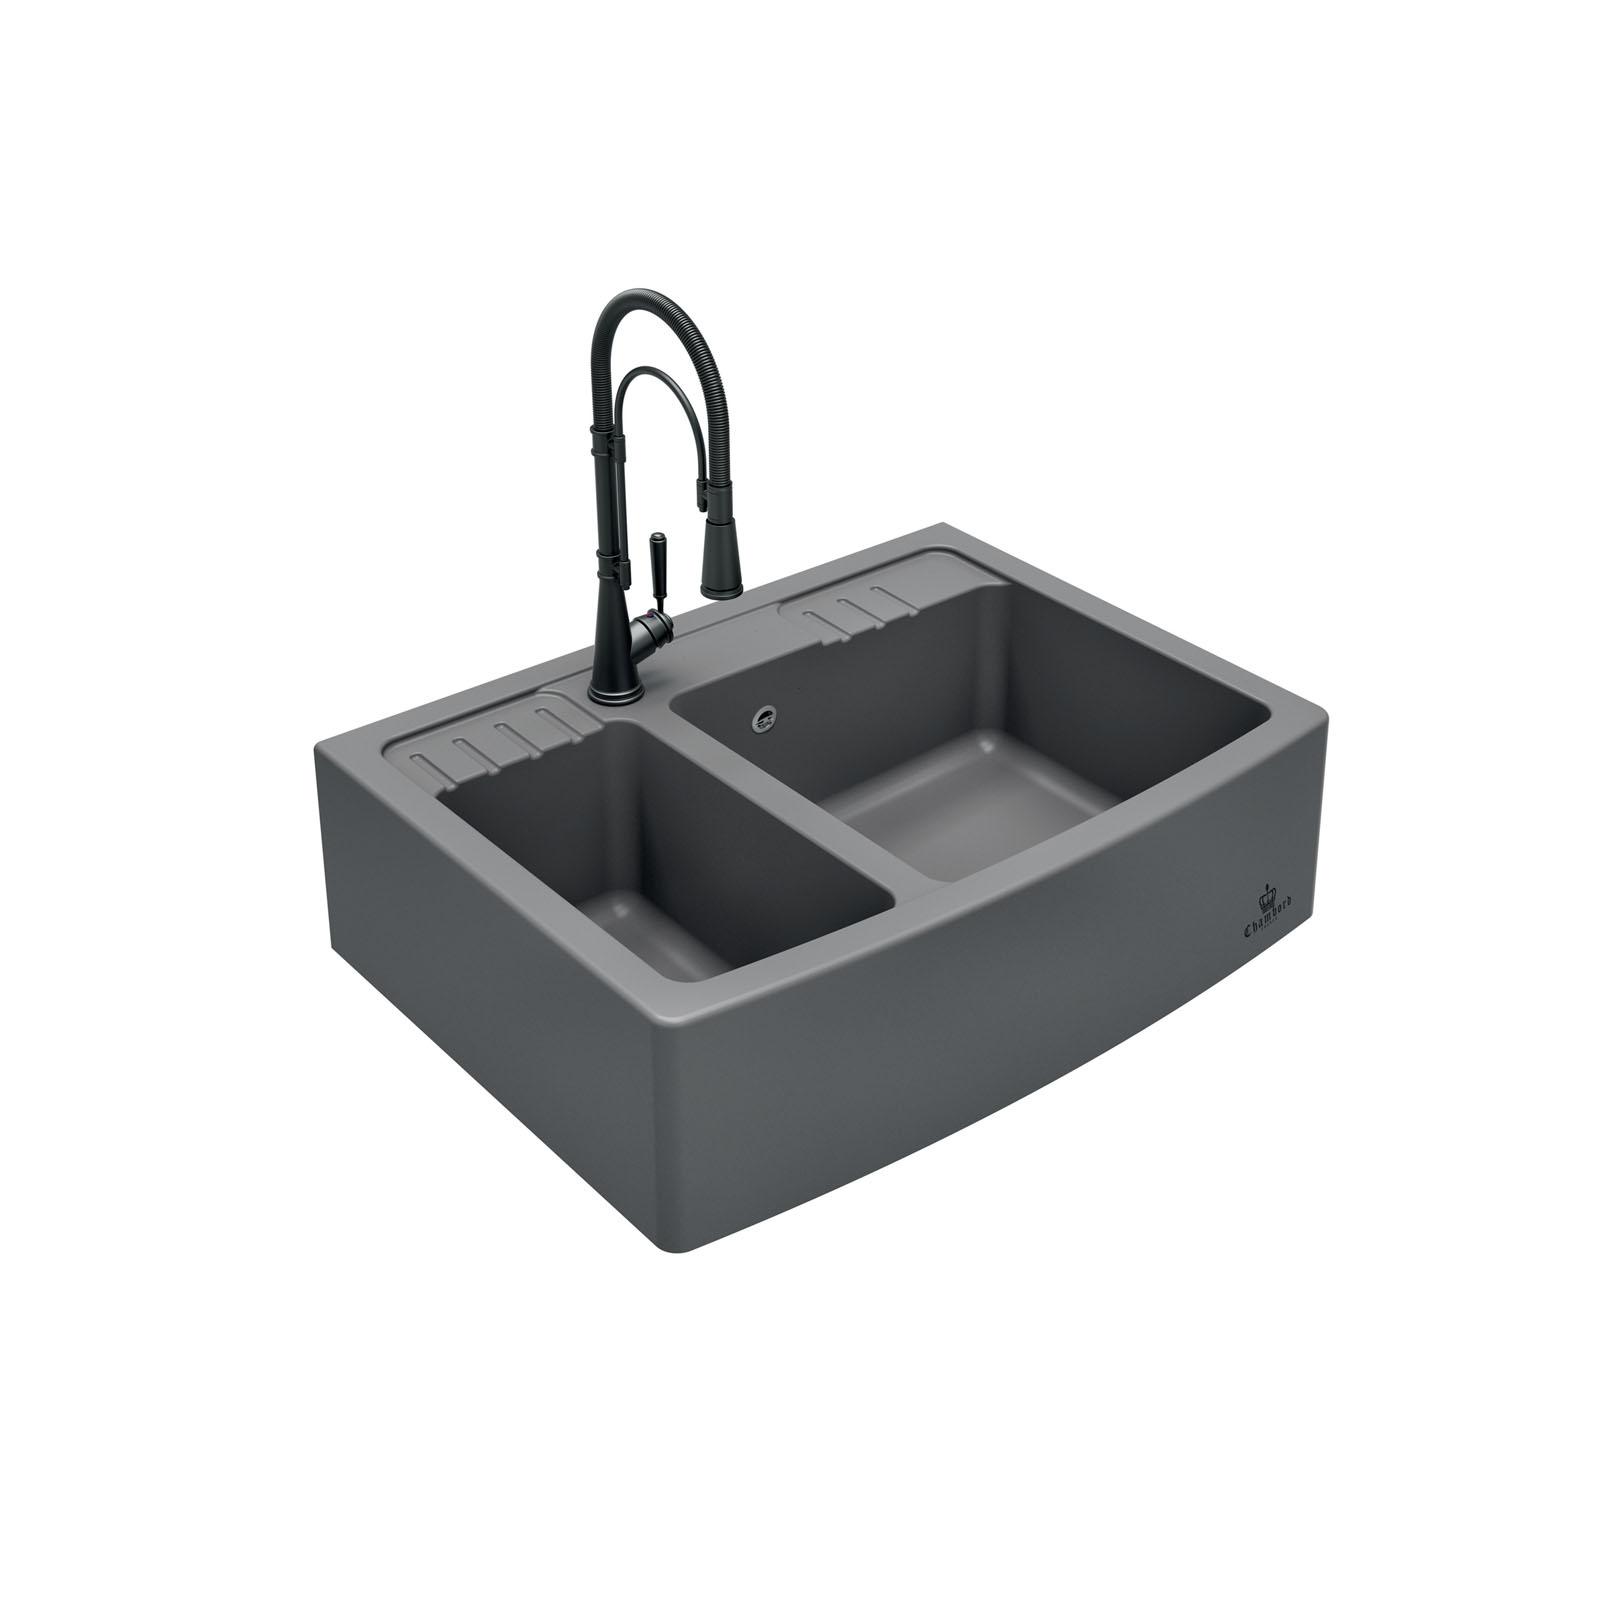 High-quality sink Clotaire III granit titanium - one and a half bowl